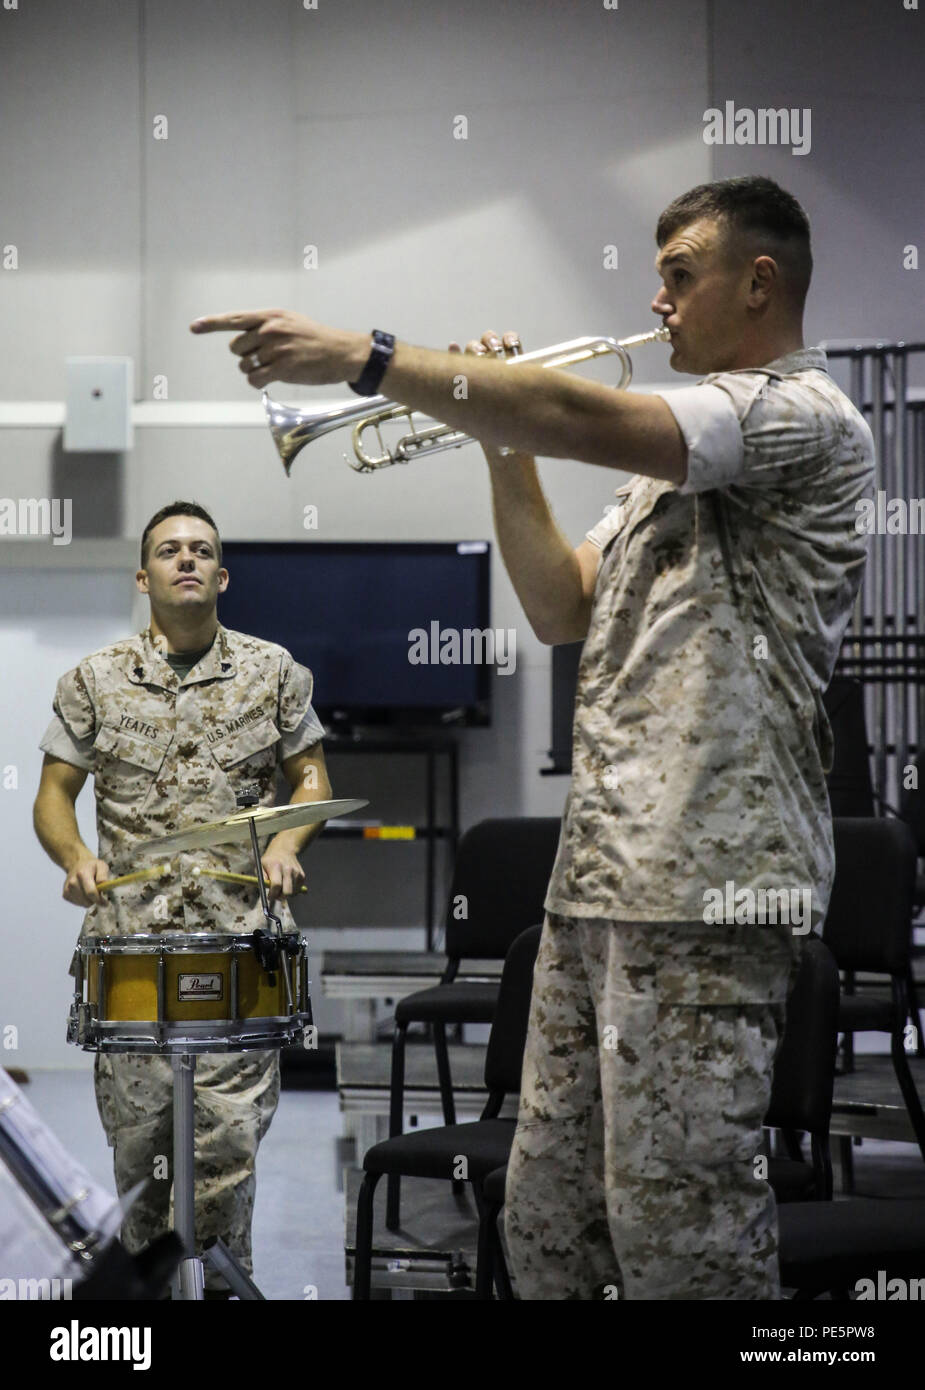 Sgt. Michael R. Hickey, right, a trumpeter with the 2nd Marine Division Band, leads the band in rehearsal for Amber N. Carter, a resident of Hubert, N.C., during her visit to the band’s command post at Camp Lejeune, N.C., Sept. 29, 2015. Amber always dreamed of joining the Marine Corps, but could not due to William’s syndrome. Staff Sgt. Isaiah Riley, a mess chief with 10th Marine Regiment, brought her and her family aboard the base to watch the band play. (U.S. Marine Corps photo by Cpl. Paul S. Martinez/Released) Stock Photo